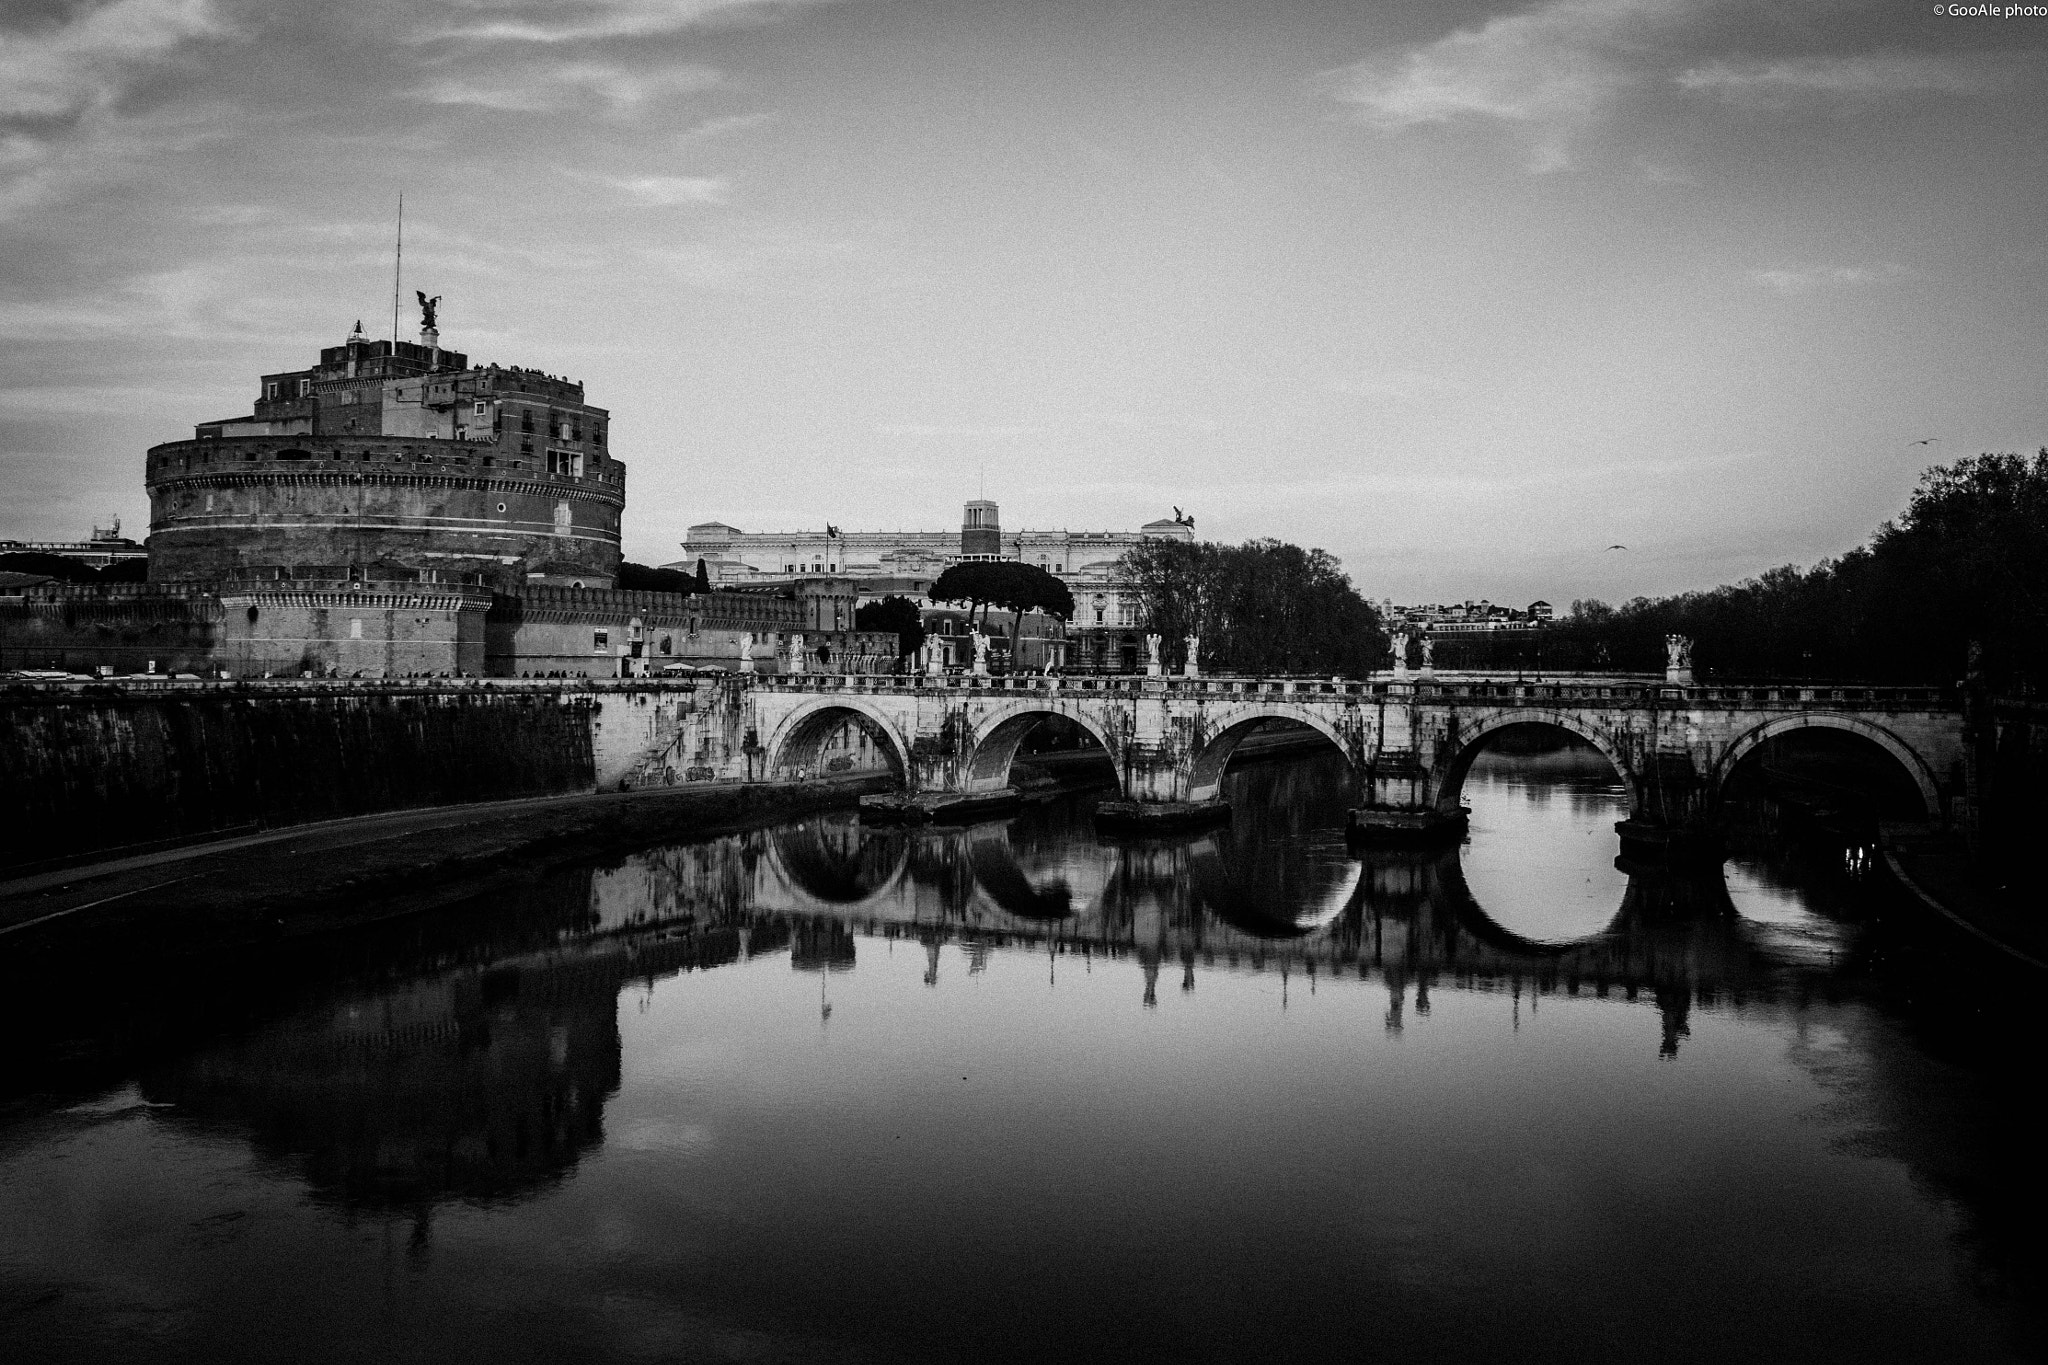 Tevere's reflections